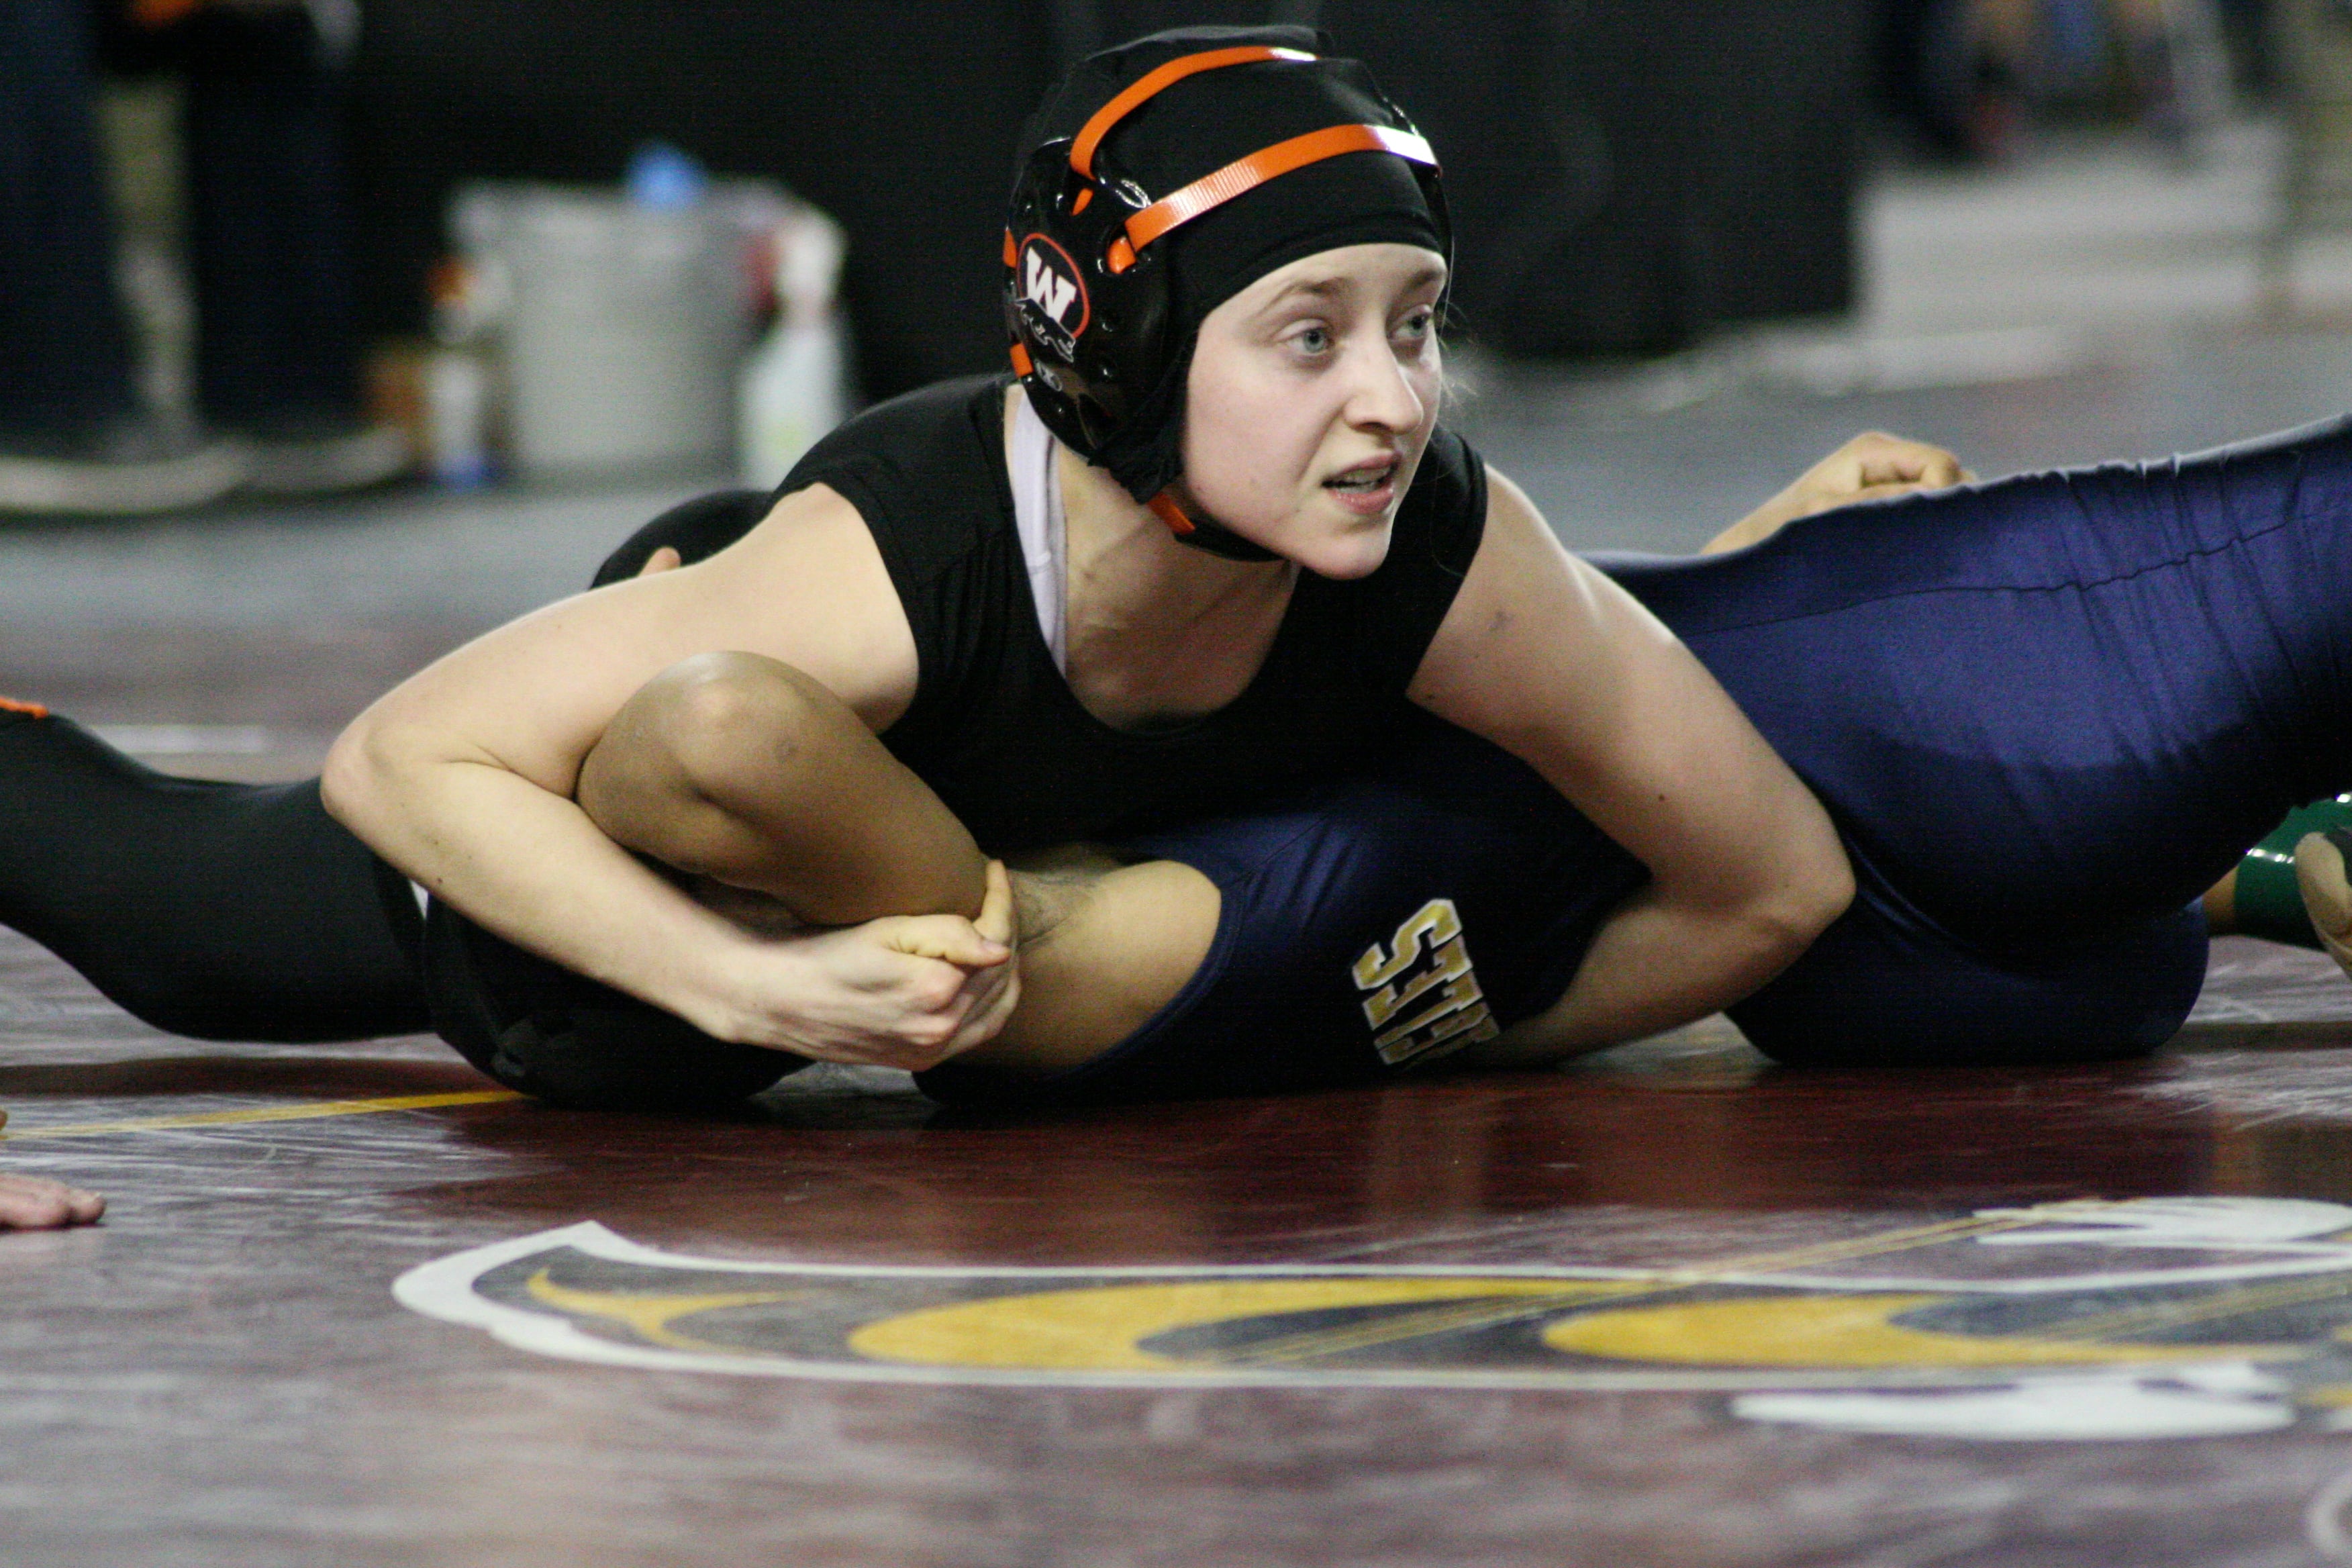 Jessica Eakins snagged seventh place for Washougal at state.